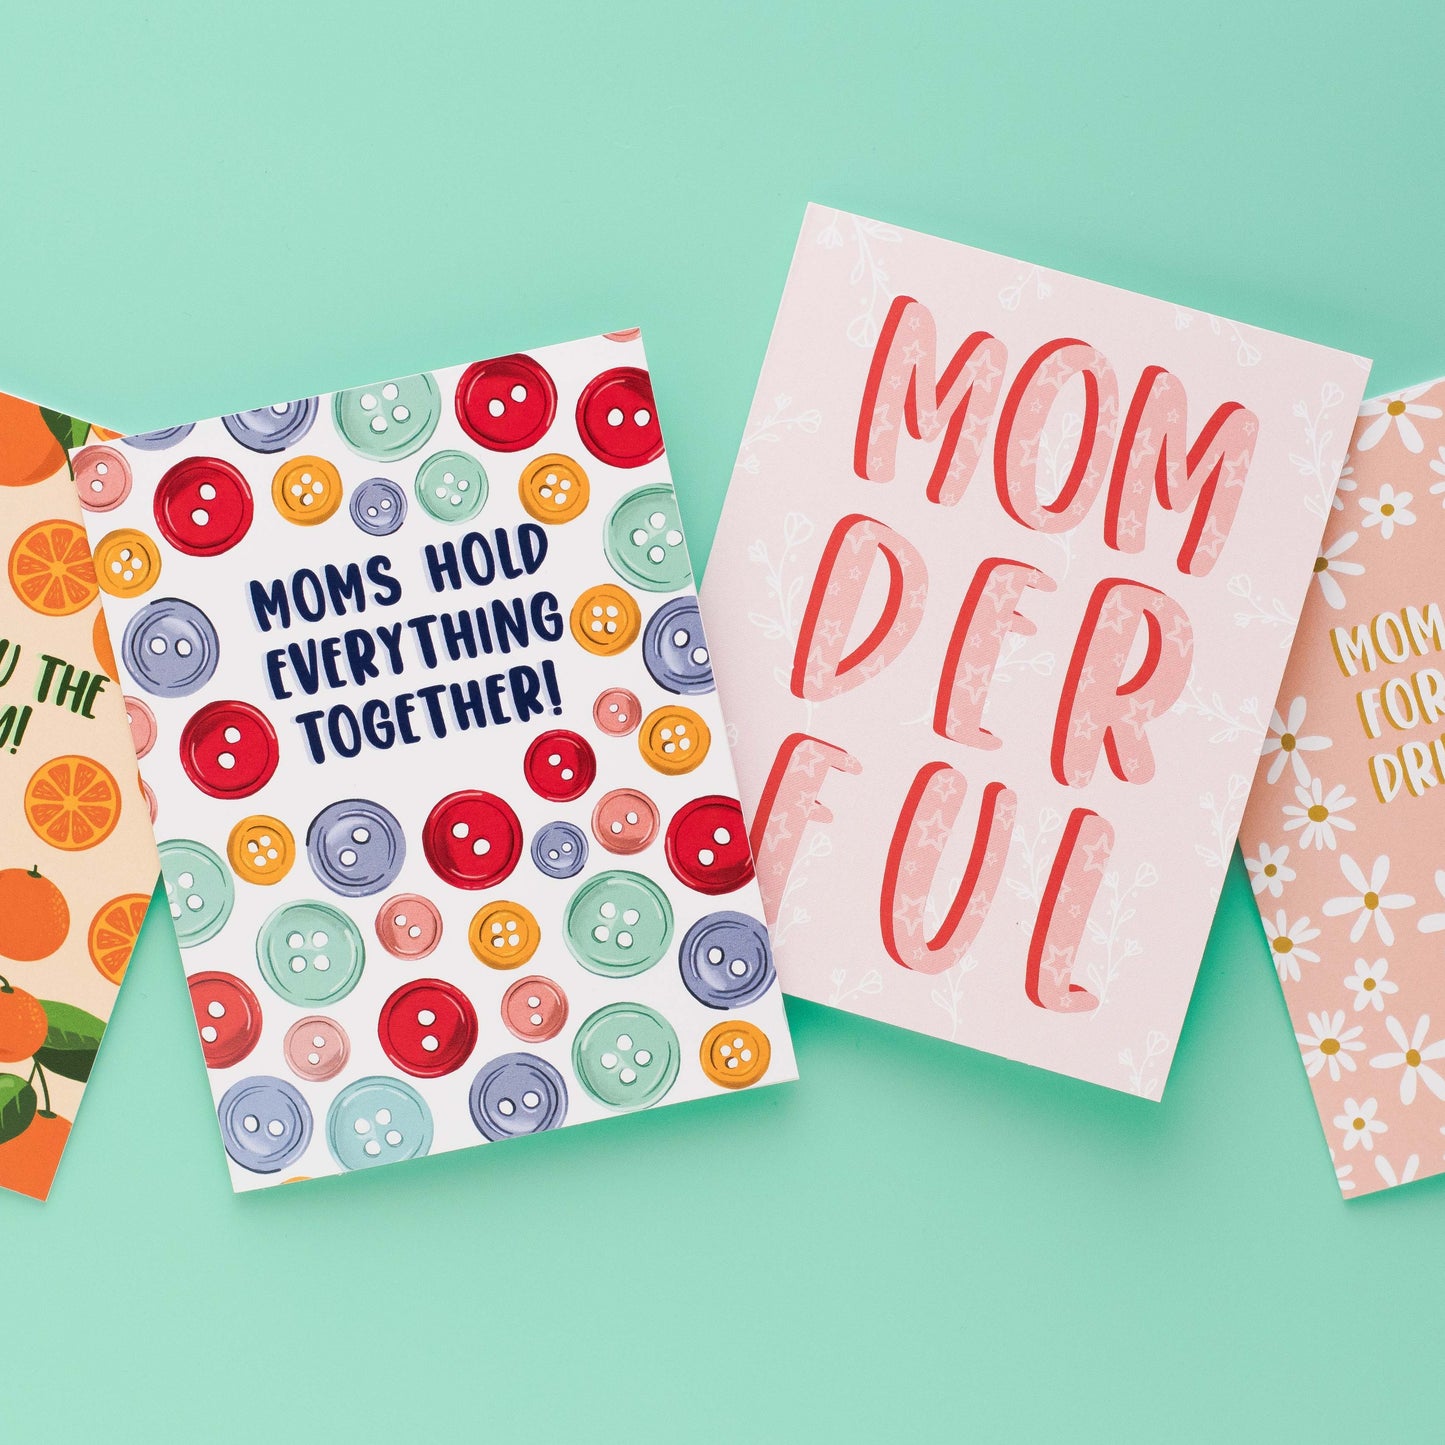 Moms Hold Everything Together! - Greeting Card